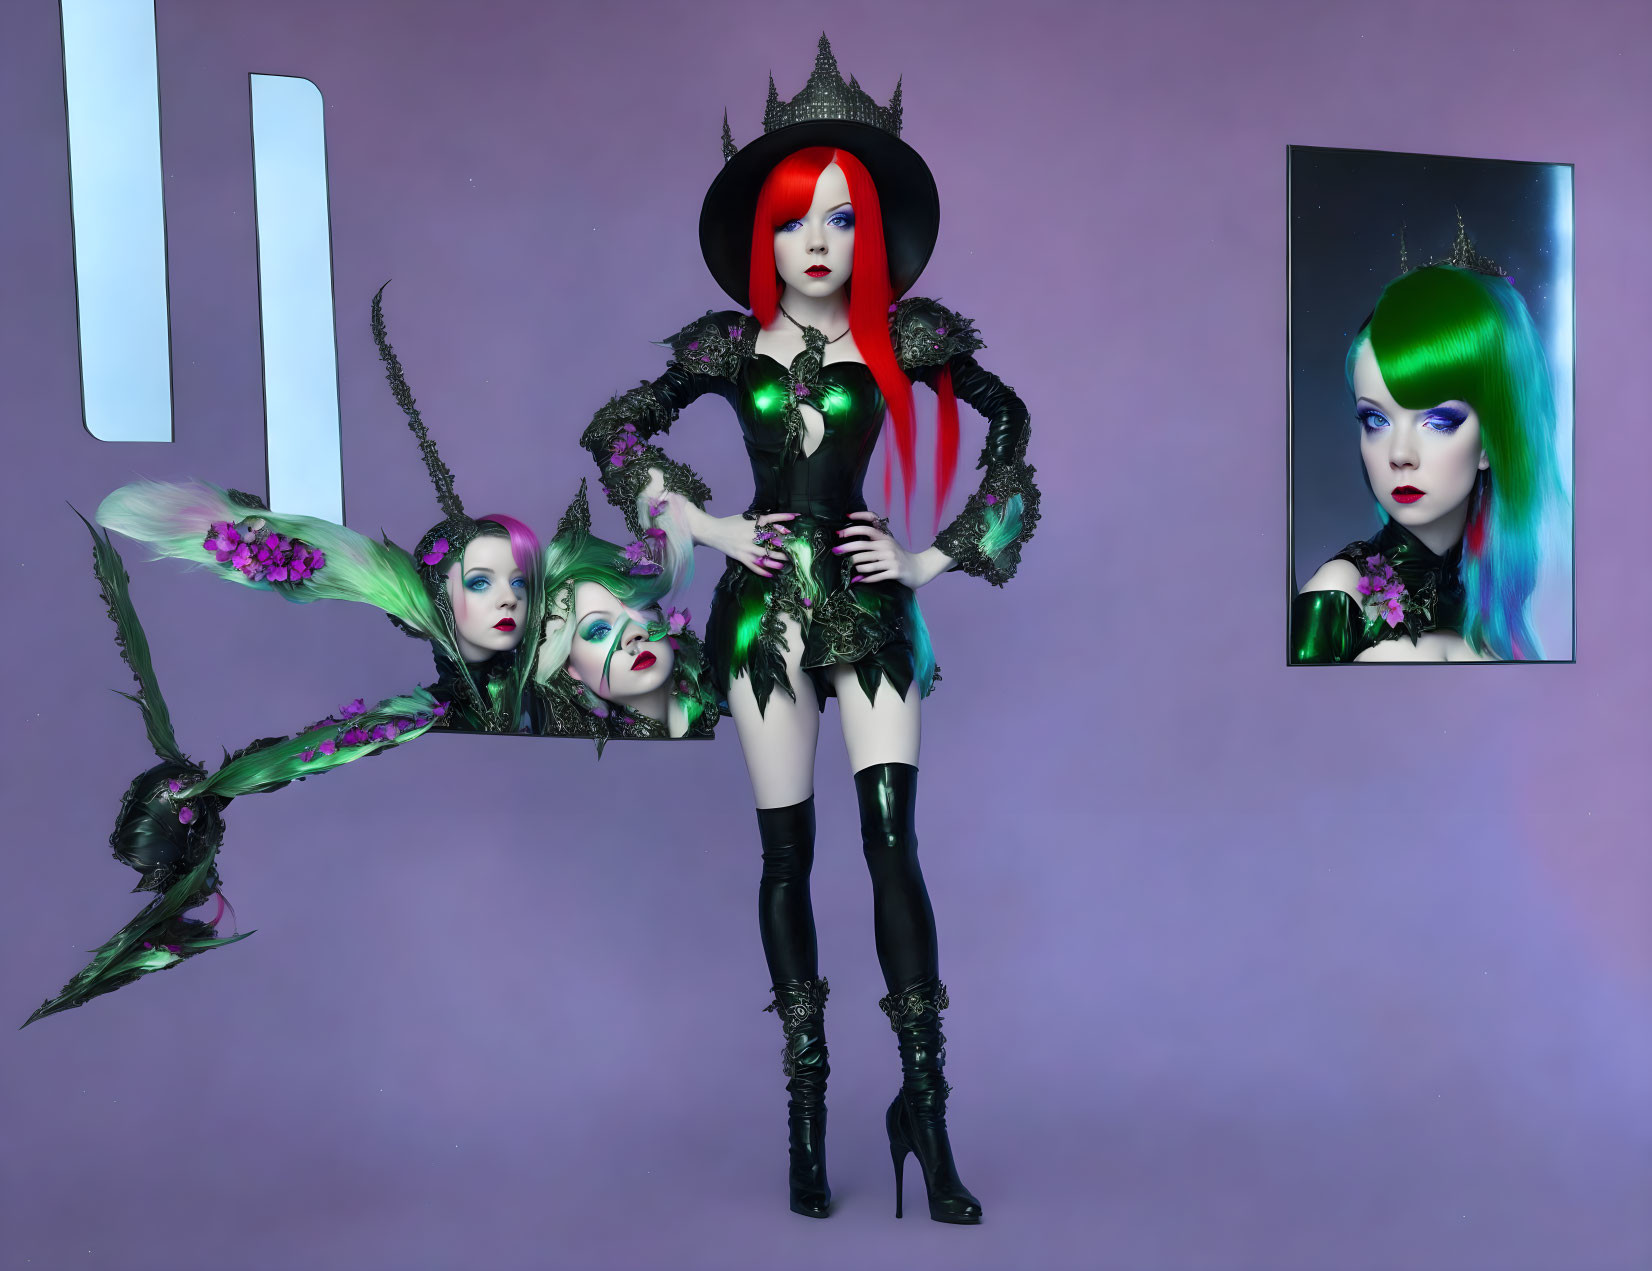 Stylized red-haired woman in gothic attire with green crystal, surreal elements, portrait, purple